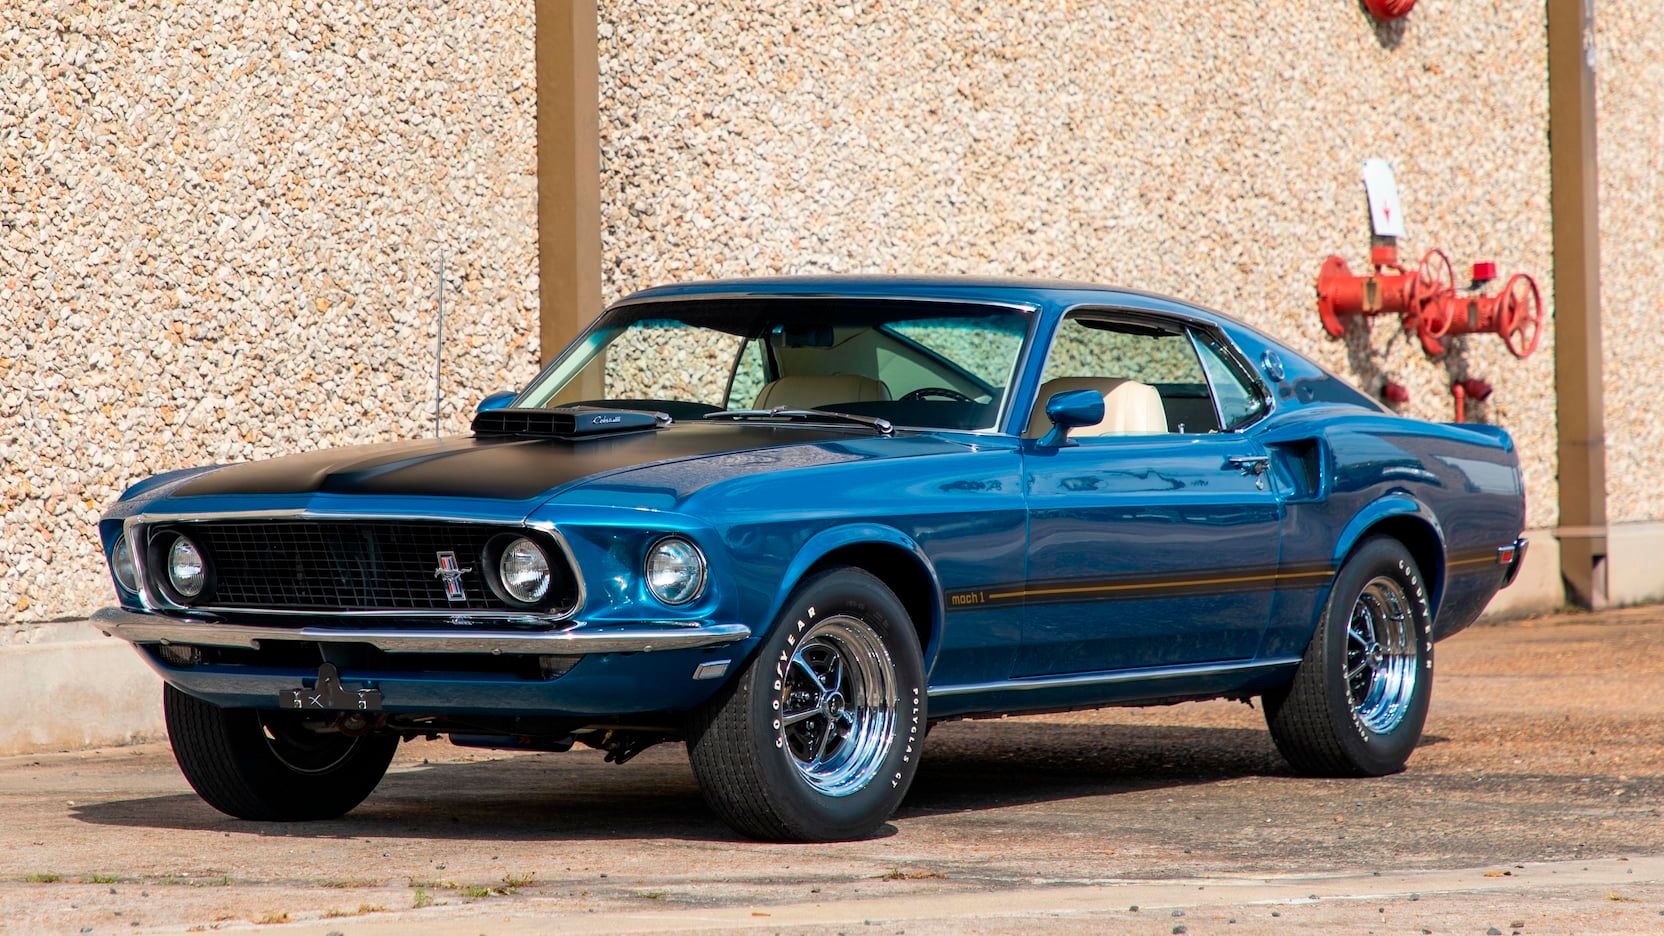 A parked 1969 Ford Mustang Mach I Cobra Jet